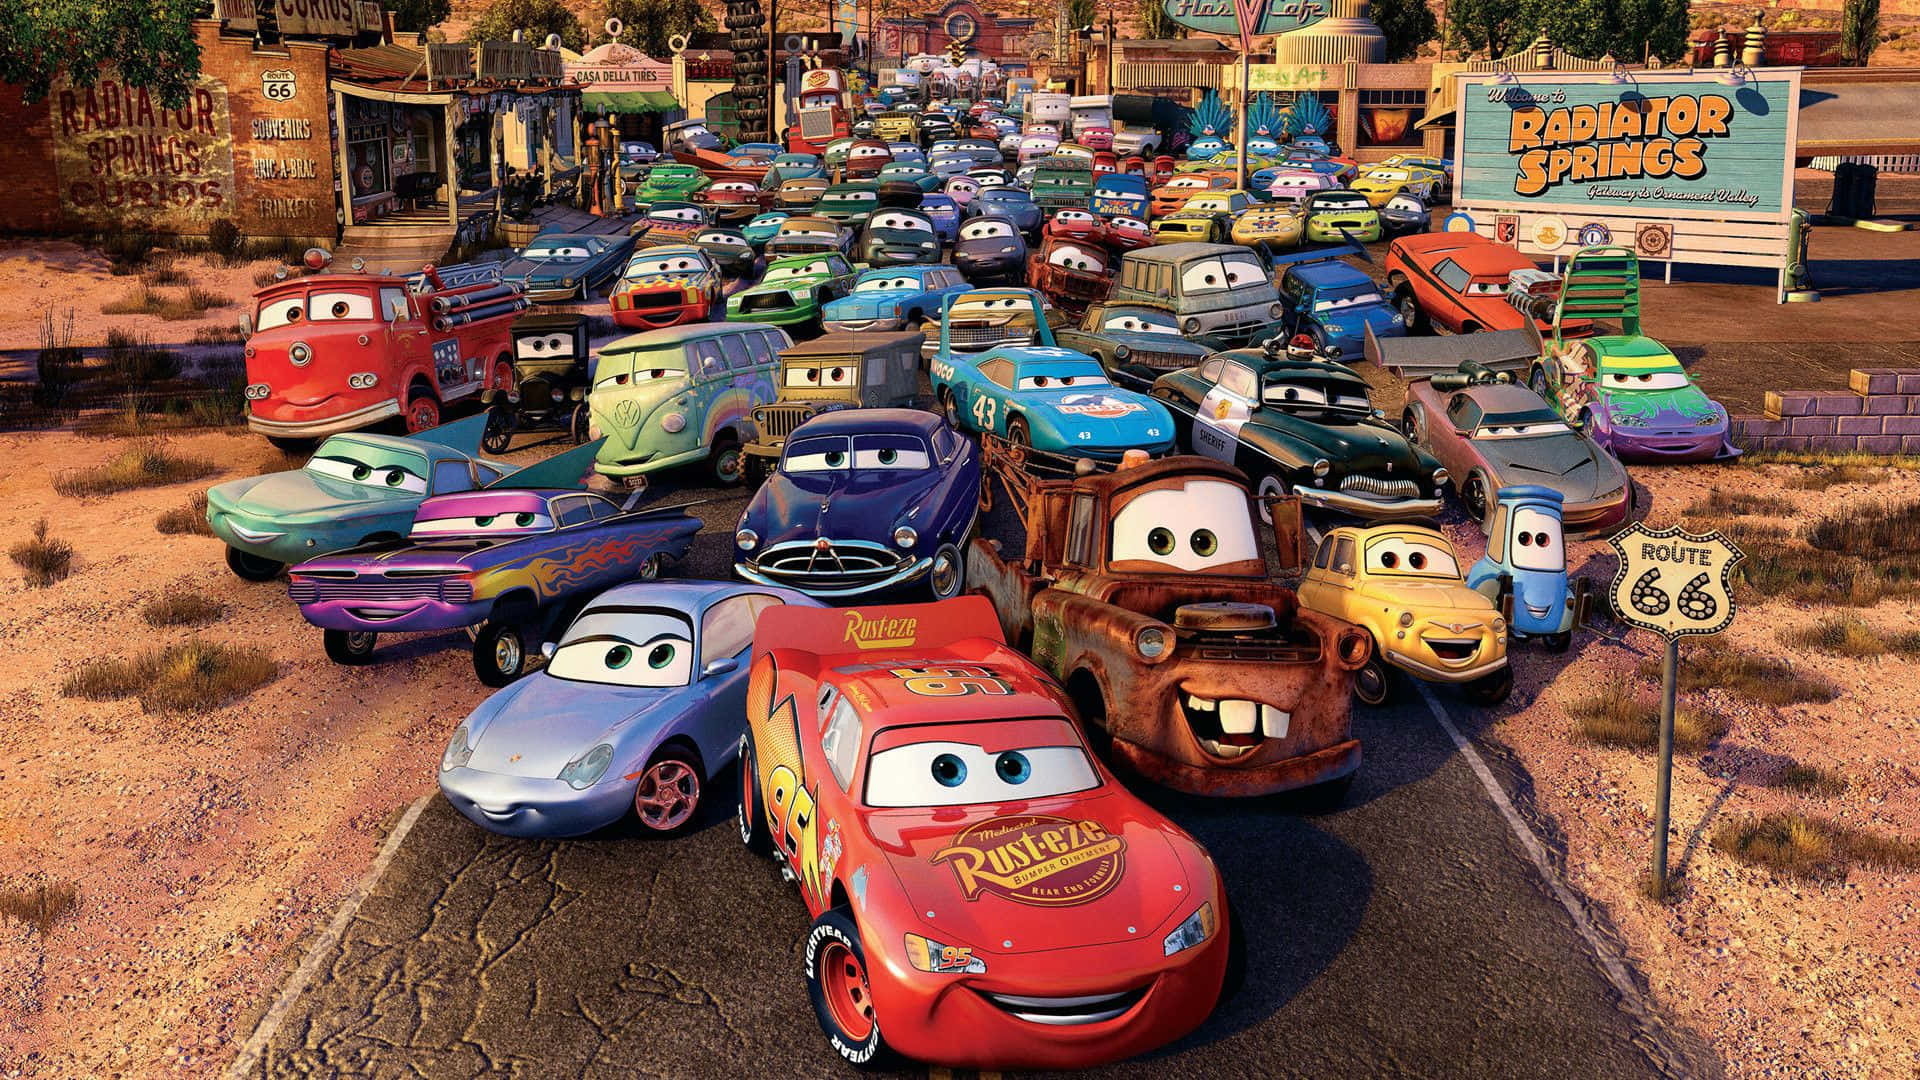 Lighting McQueen is ready to take on the world in the ‘Cars 2’ movie!